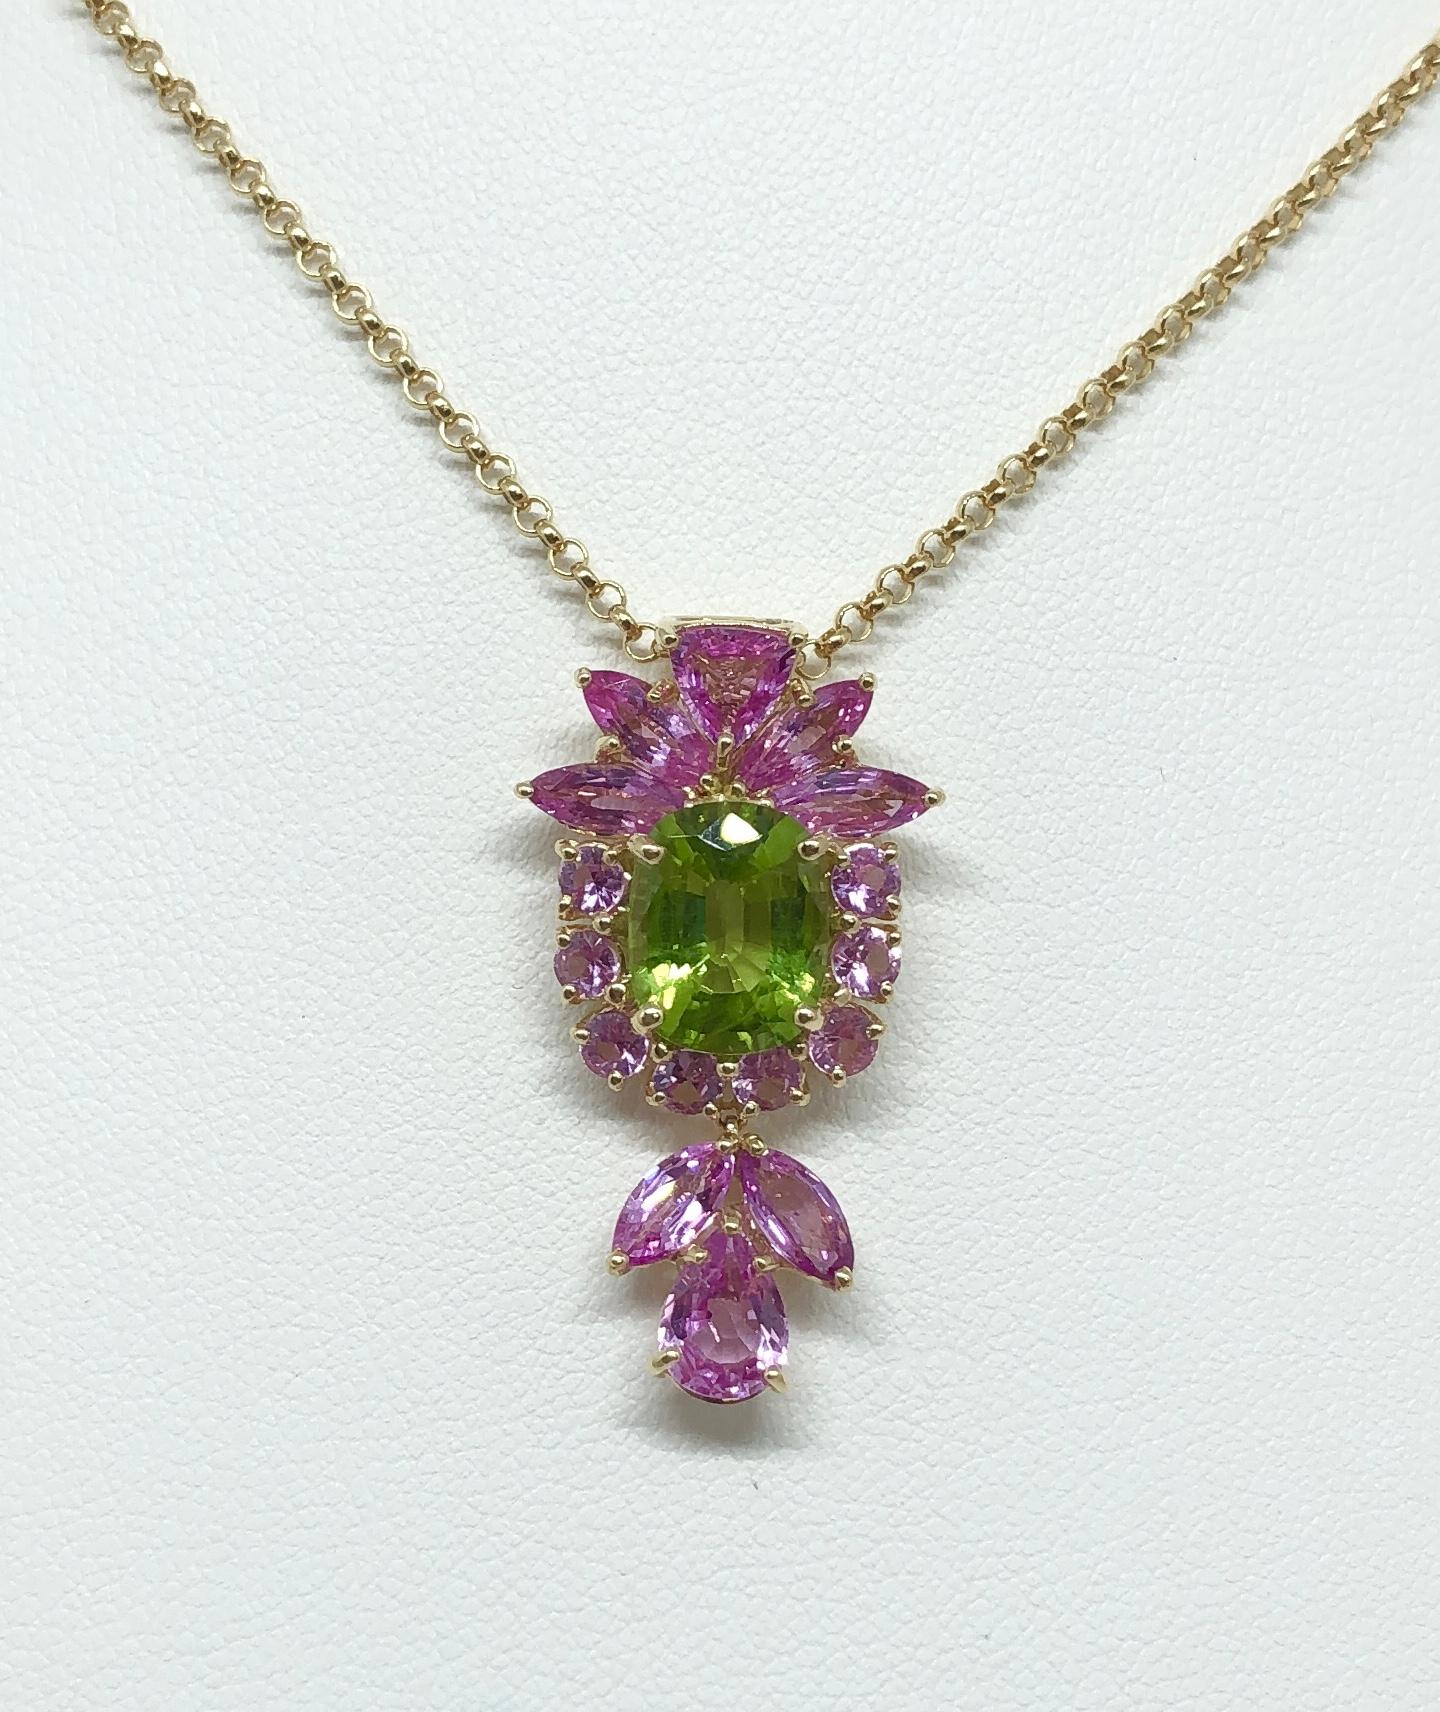 Peridot 3.0 carats with Pink Sapphire 4.41 carat Pendant set in 18 Karat Gold Settings
(chain not included)

Width: 1.8 cm 
Length: 3.3 cm
Total Weight: 5.12 grams

